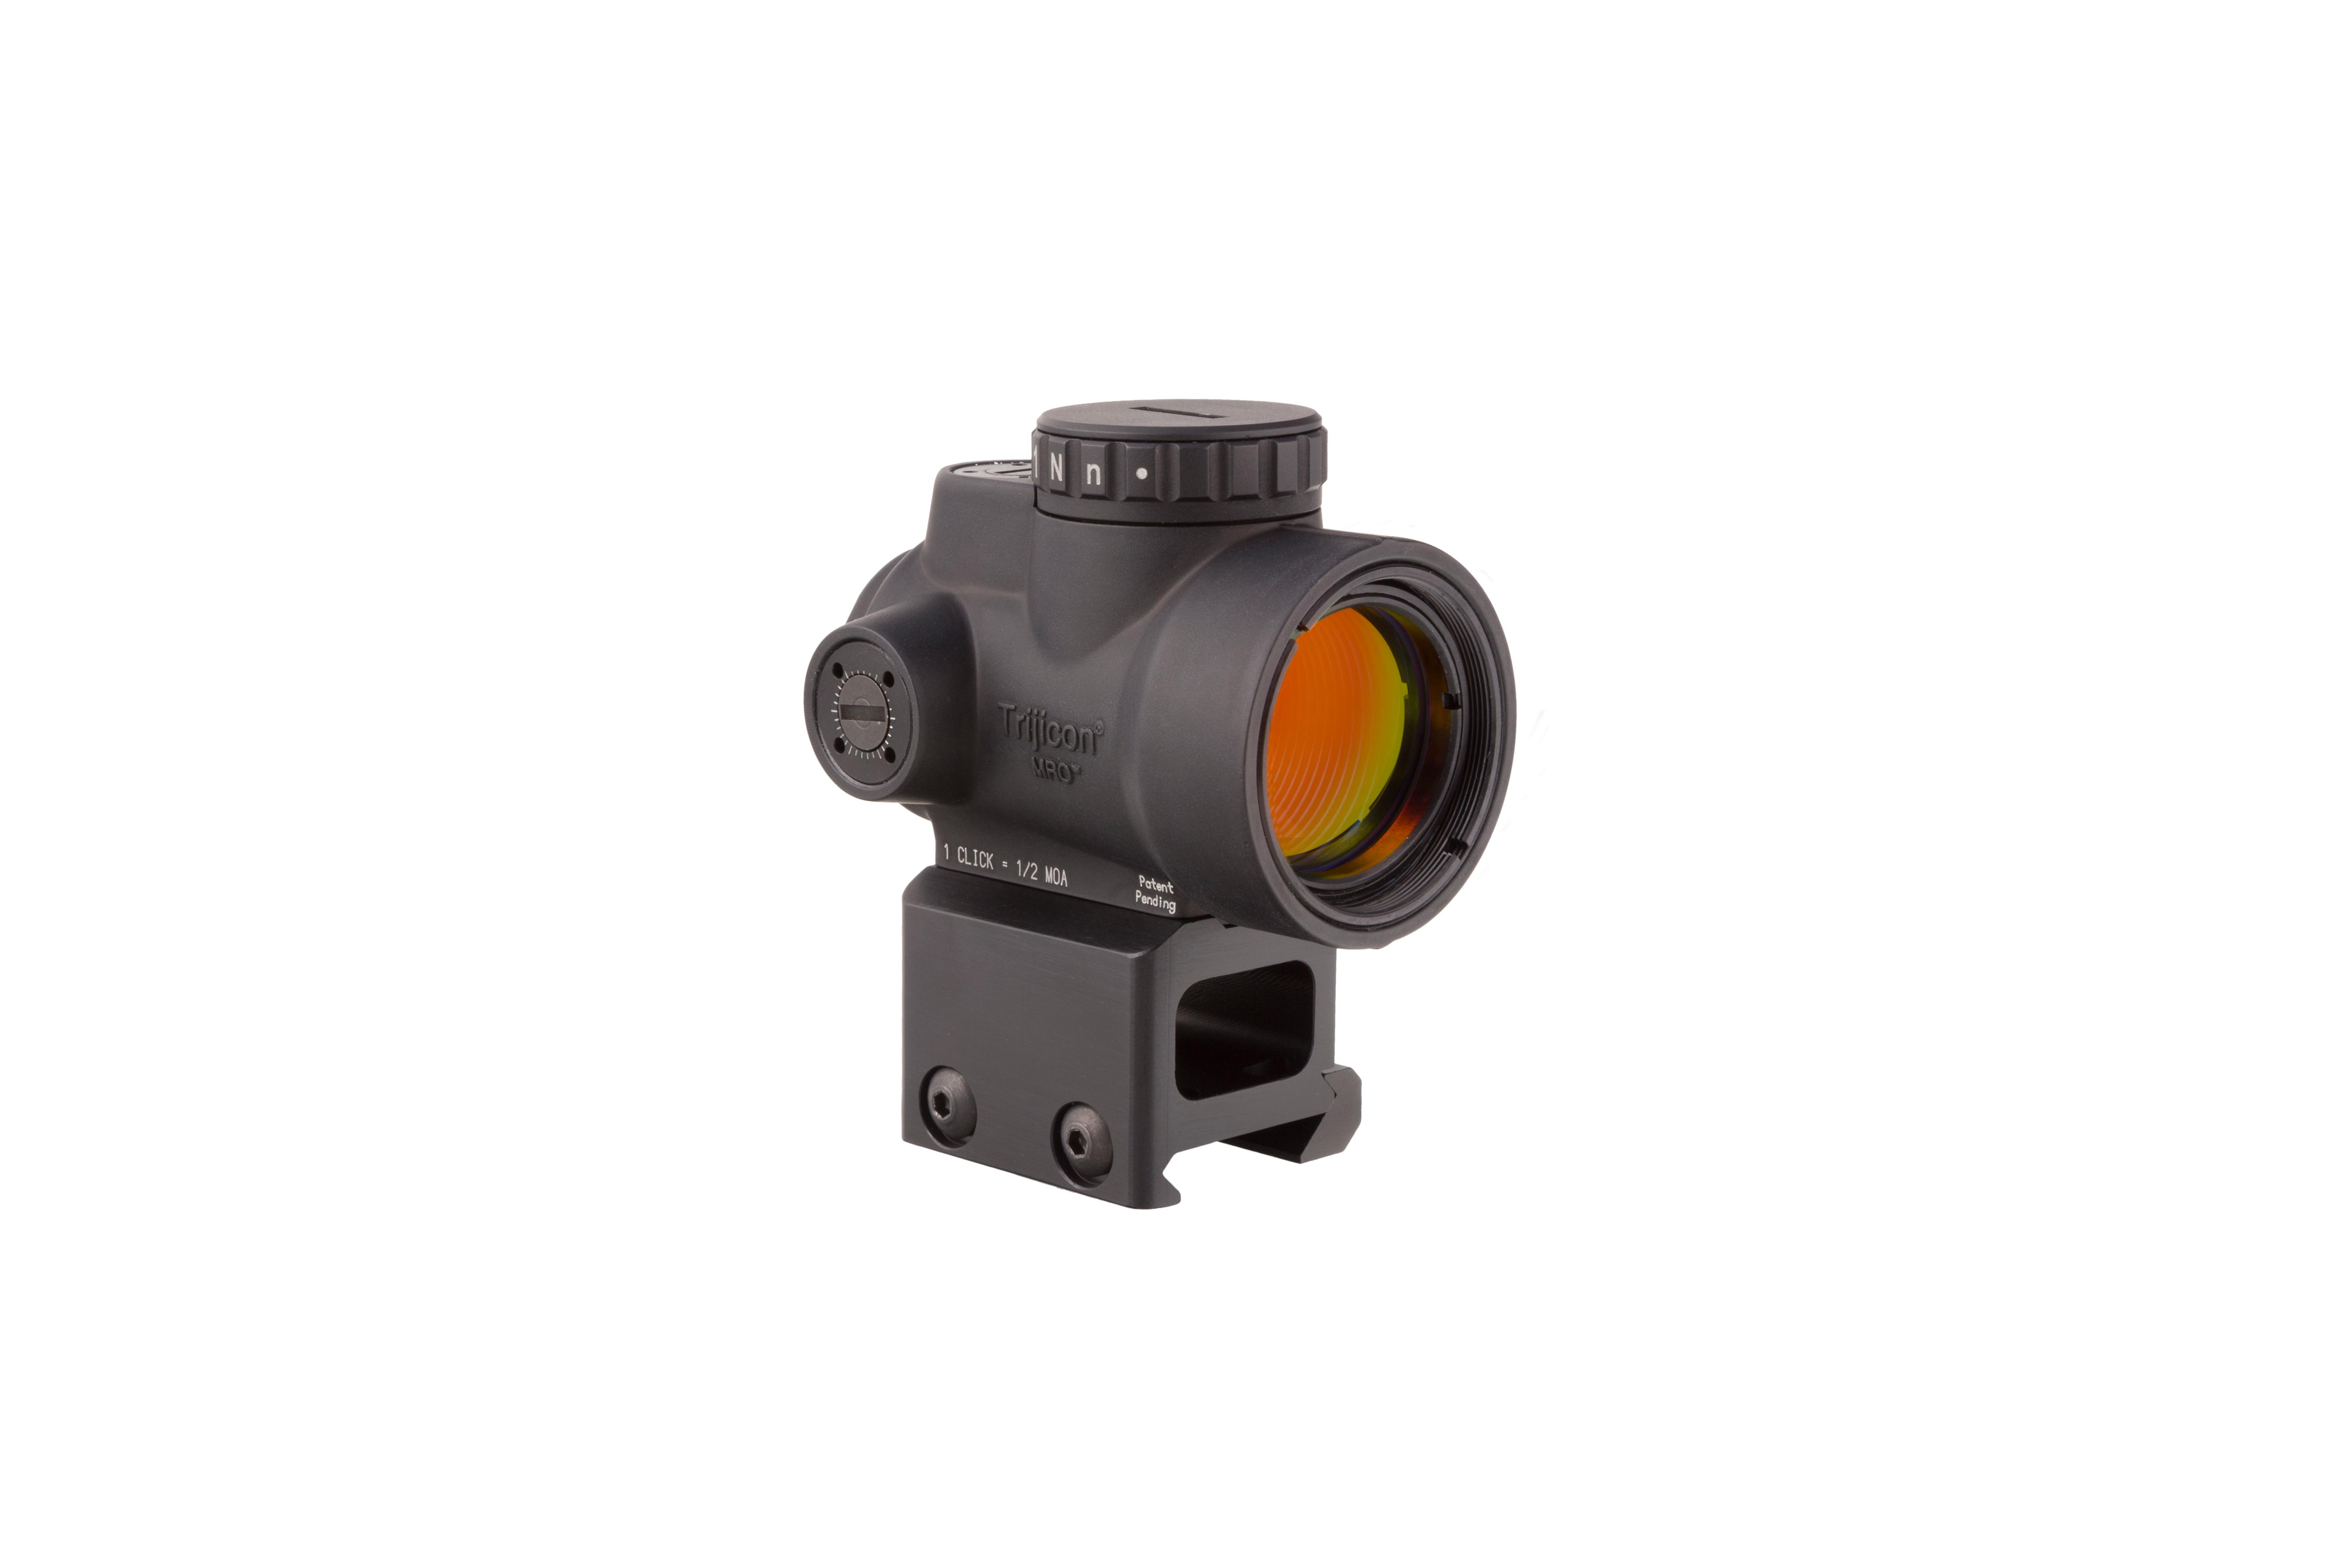  Trijicon Mro 2.0 Moa Adjustable Red Dot With Lower 1/3 Co- Witness Mount Mro- C- 2200006